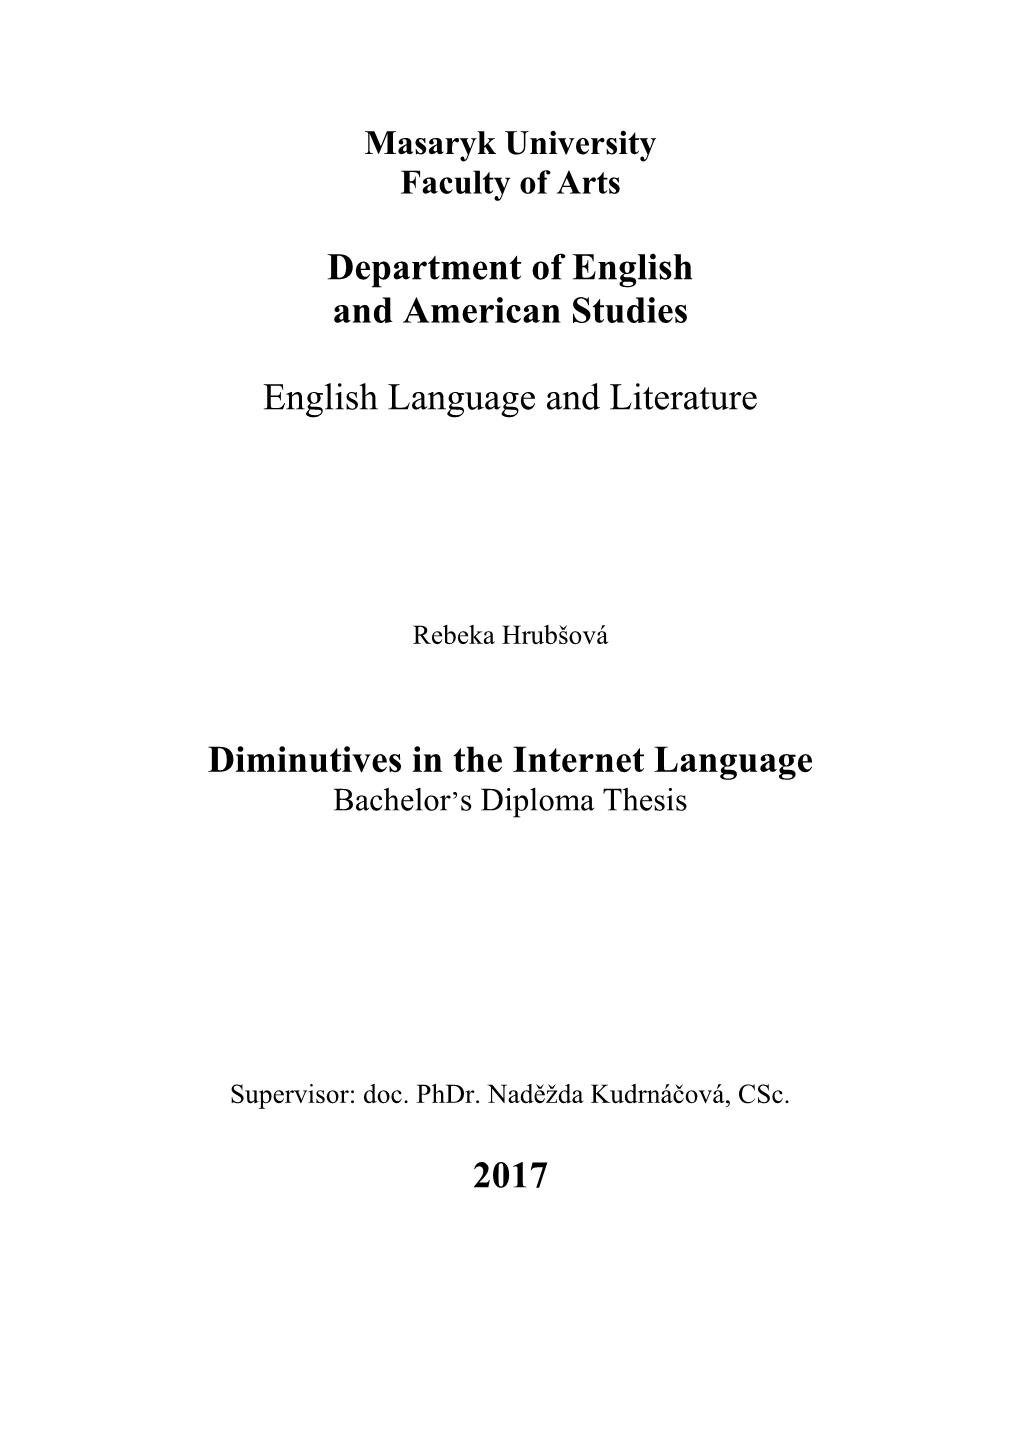 Diminutives in the Internet Language Bachelor’S Diploma Thesis